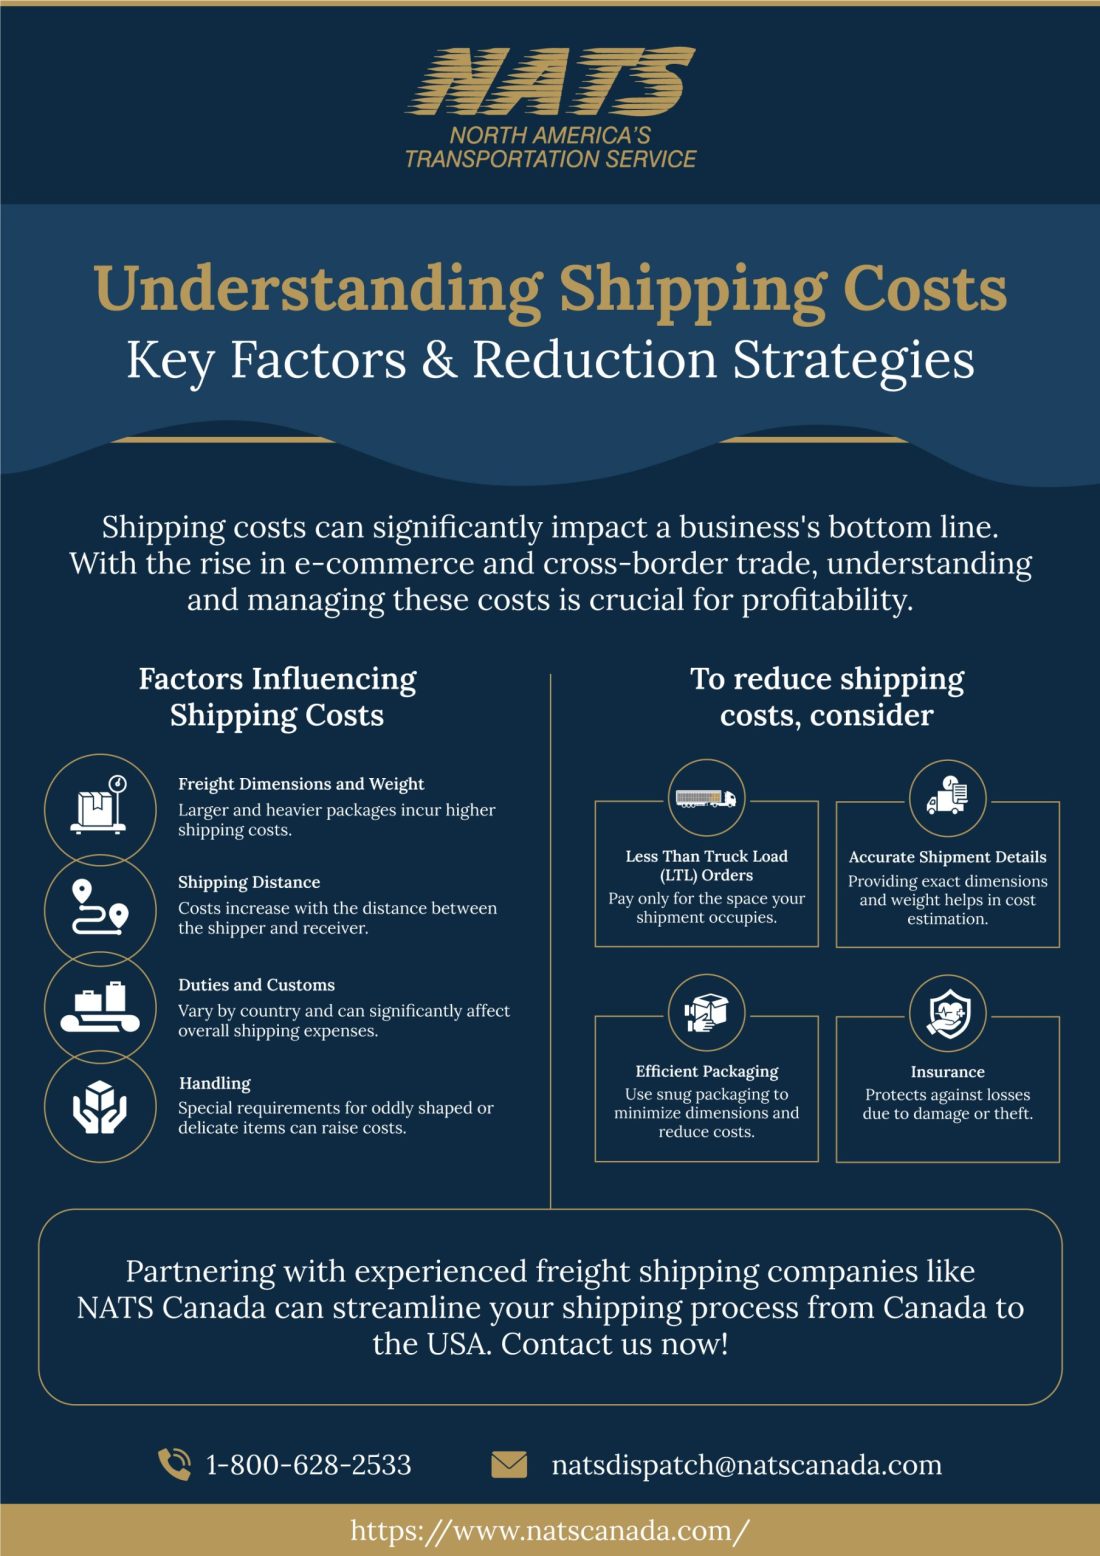 EL FA)

NORTH AMERICA'S
TRANSPORTATION SERVICE

Understanding Shipping Costs
Key Factors & Reduction Strategies

 

 

Shipping costs can significantly impact a business's bottom line.
With the rise in e-commerce and cross-border trade, understanding
and managing these costs is crucial for profitability.

Factors Influencing
Shipping Costs

Freight Dimensions and Weight
Larger and heavier packages incur higher
shipping costs.

Shipping Distance
Costs increase with the distance between
the shipper and receiver.

PIELER GETTY
Vary by country and can significantly affect
FE a a

RTE
Special requirements for oddly shaped or
delicate items can raise costs

 

To reduce shipping
costs, consider

—

iL)

\ J

Less Than Truck Load
(LTL) Orders

SRT
Rp

py
Efficient Packaging
Use snug packagi

RR EZ RU TY
[Saat

I
and

 

 

yr N\
ND

Accurate Shipment Details
ct dimensions
ps in cost

  

[Eee
Protects against losses
amage or theft

 

Partnering with experienced freight shipping companies like
NATS Canada can streamline your shipping process from Canada to
the USA. Contact us now!

Q 1-800-628-2533

4 natsdispatch@natscanada.com